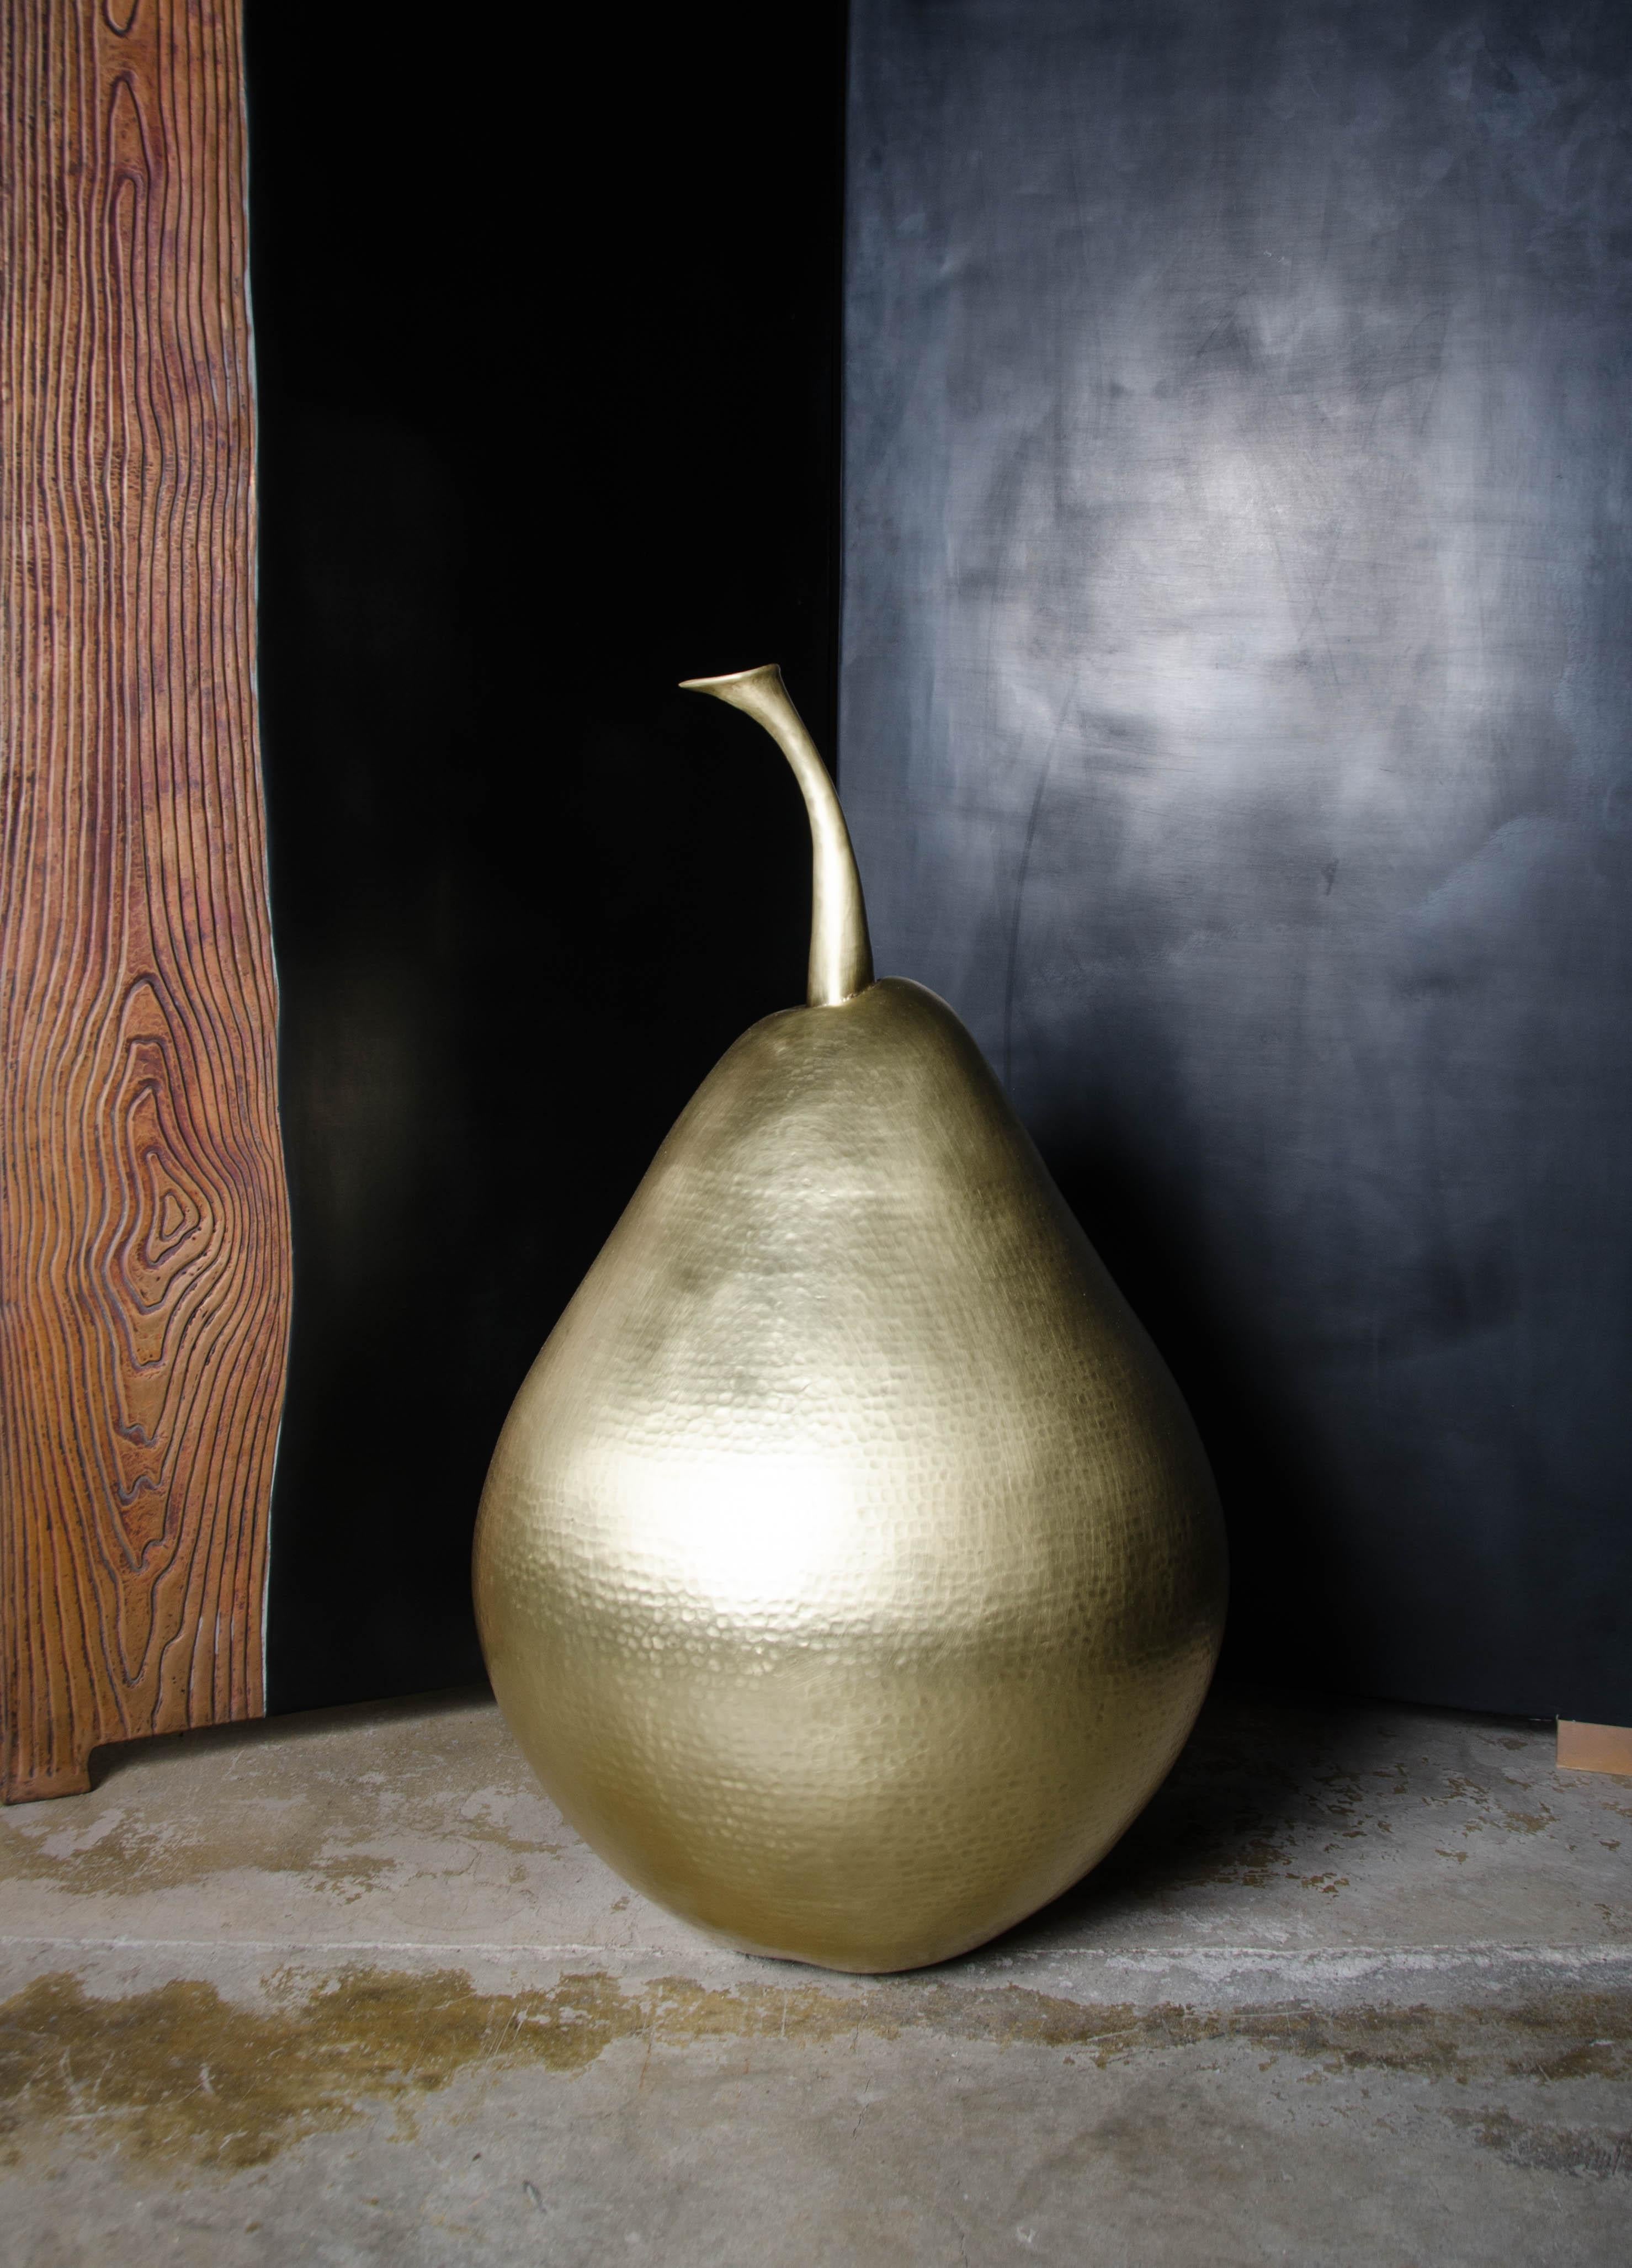 Pear sculpture
Brass
Hand Repoussé
Limited Edition
Each piece is individually crafted and is unique.
Repoussé is the traditional art of hand-hammering decorative relief onto sheet metal. The technique originated around 800 BC between Asia and